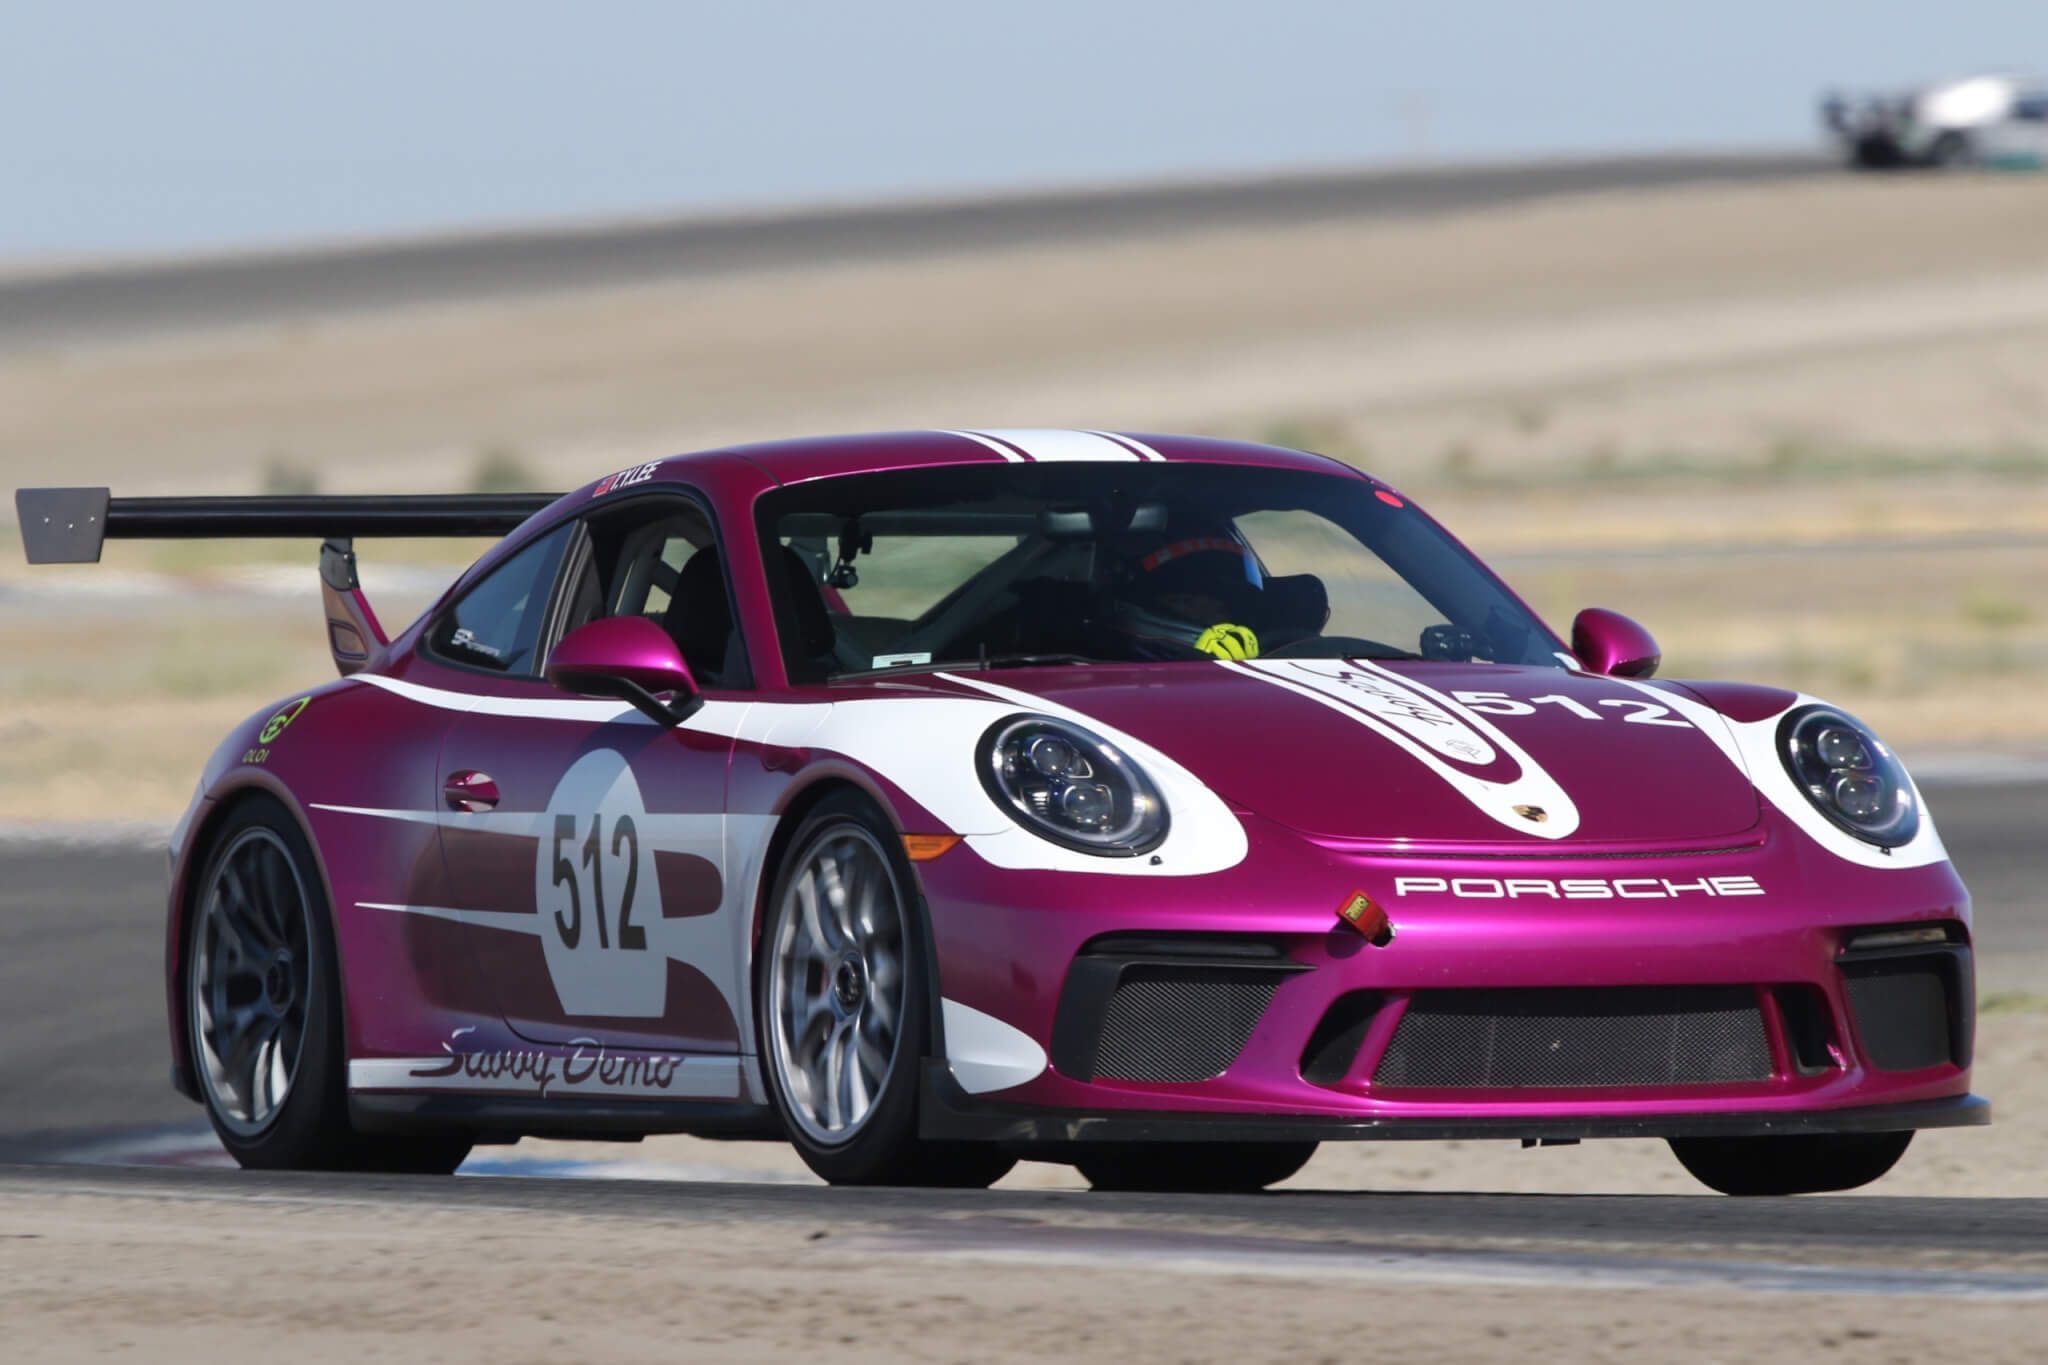 #512 GT3 coming in hot at buttonwillow raceway